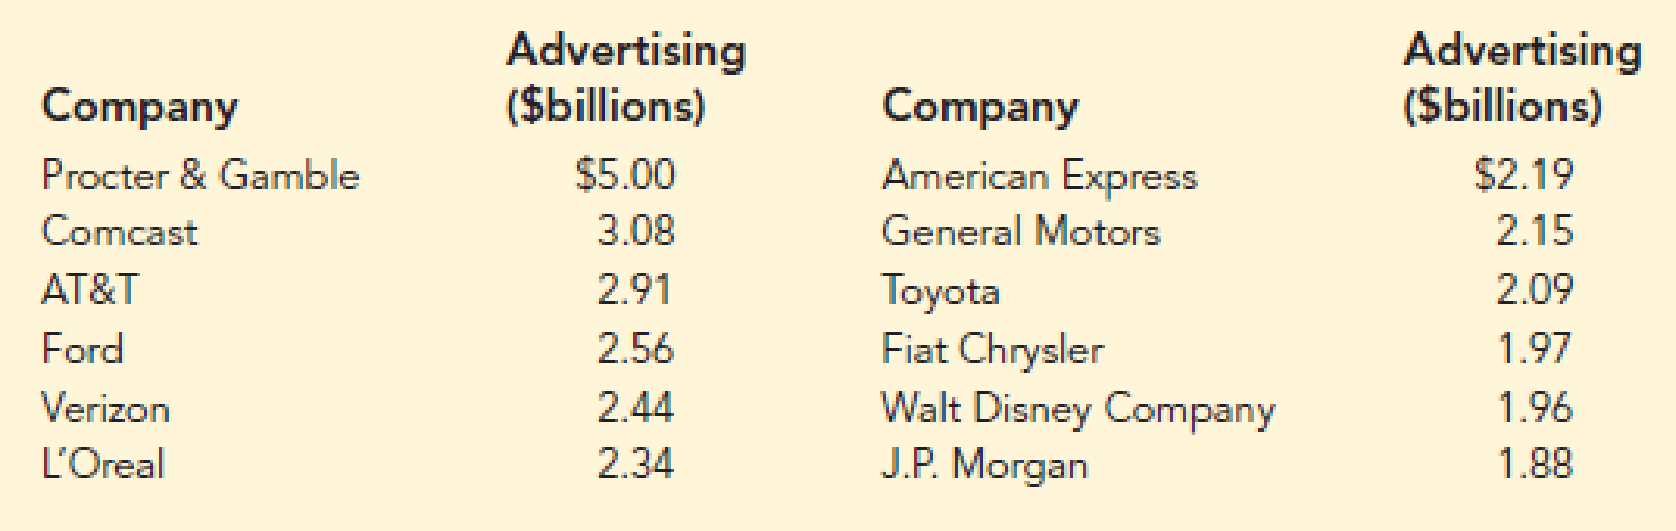 Chapter 3.1, Problem 10E, Advertising Spending. Which companies spend the most money on advertising? Business Insider 